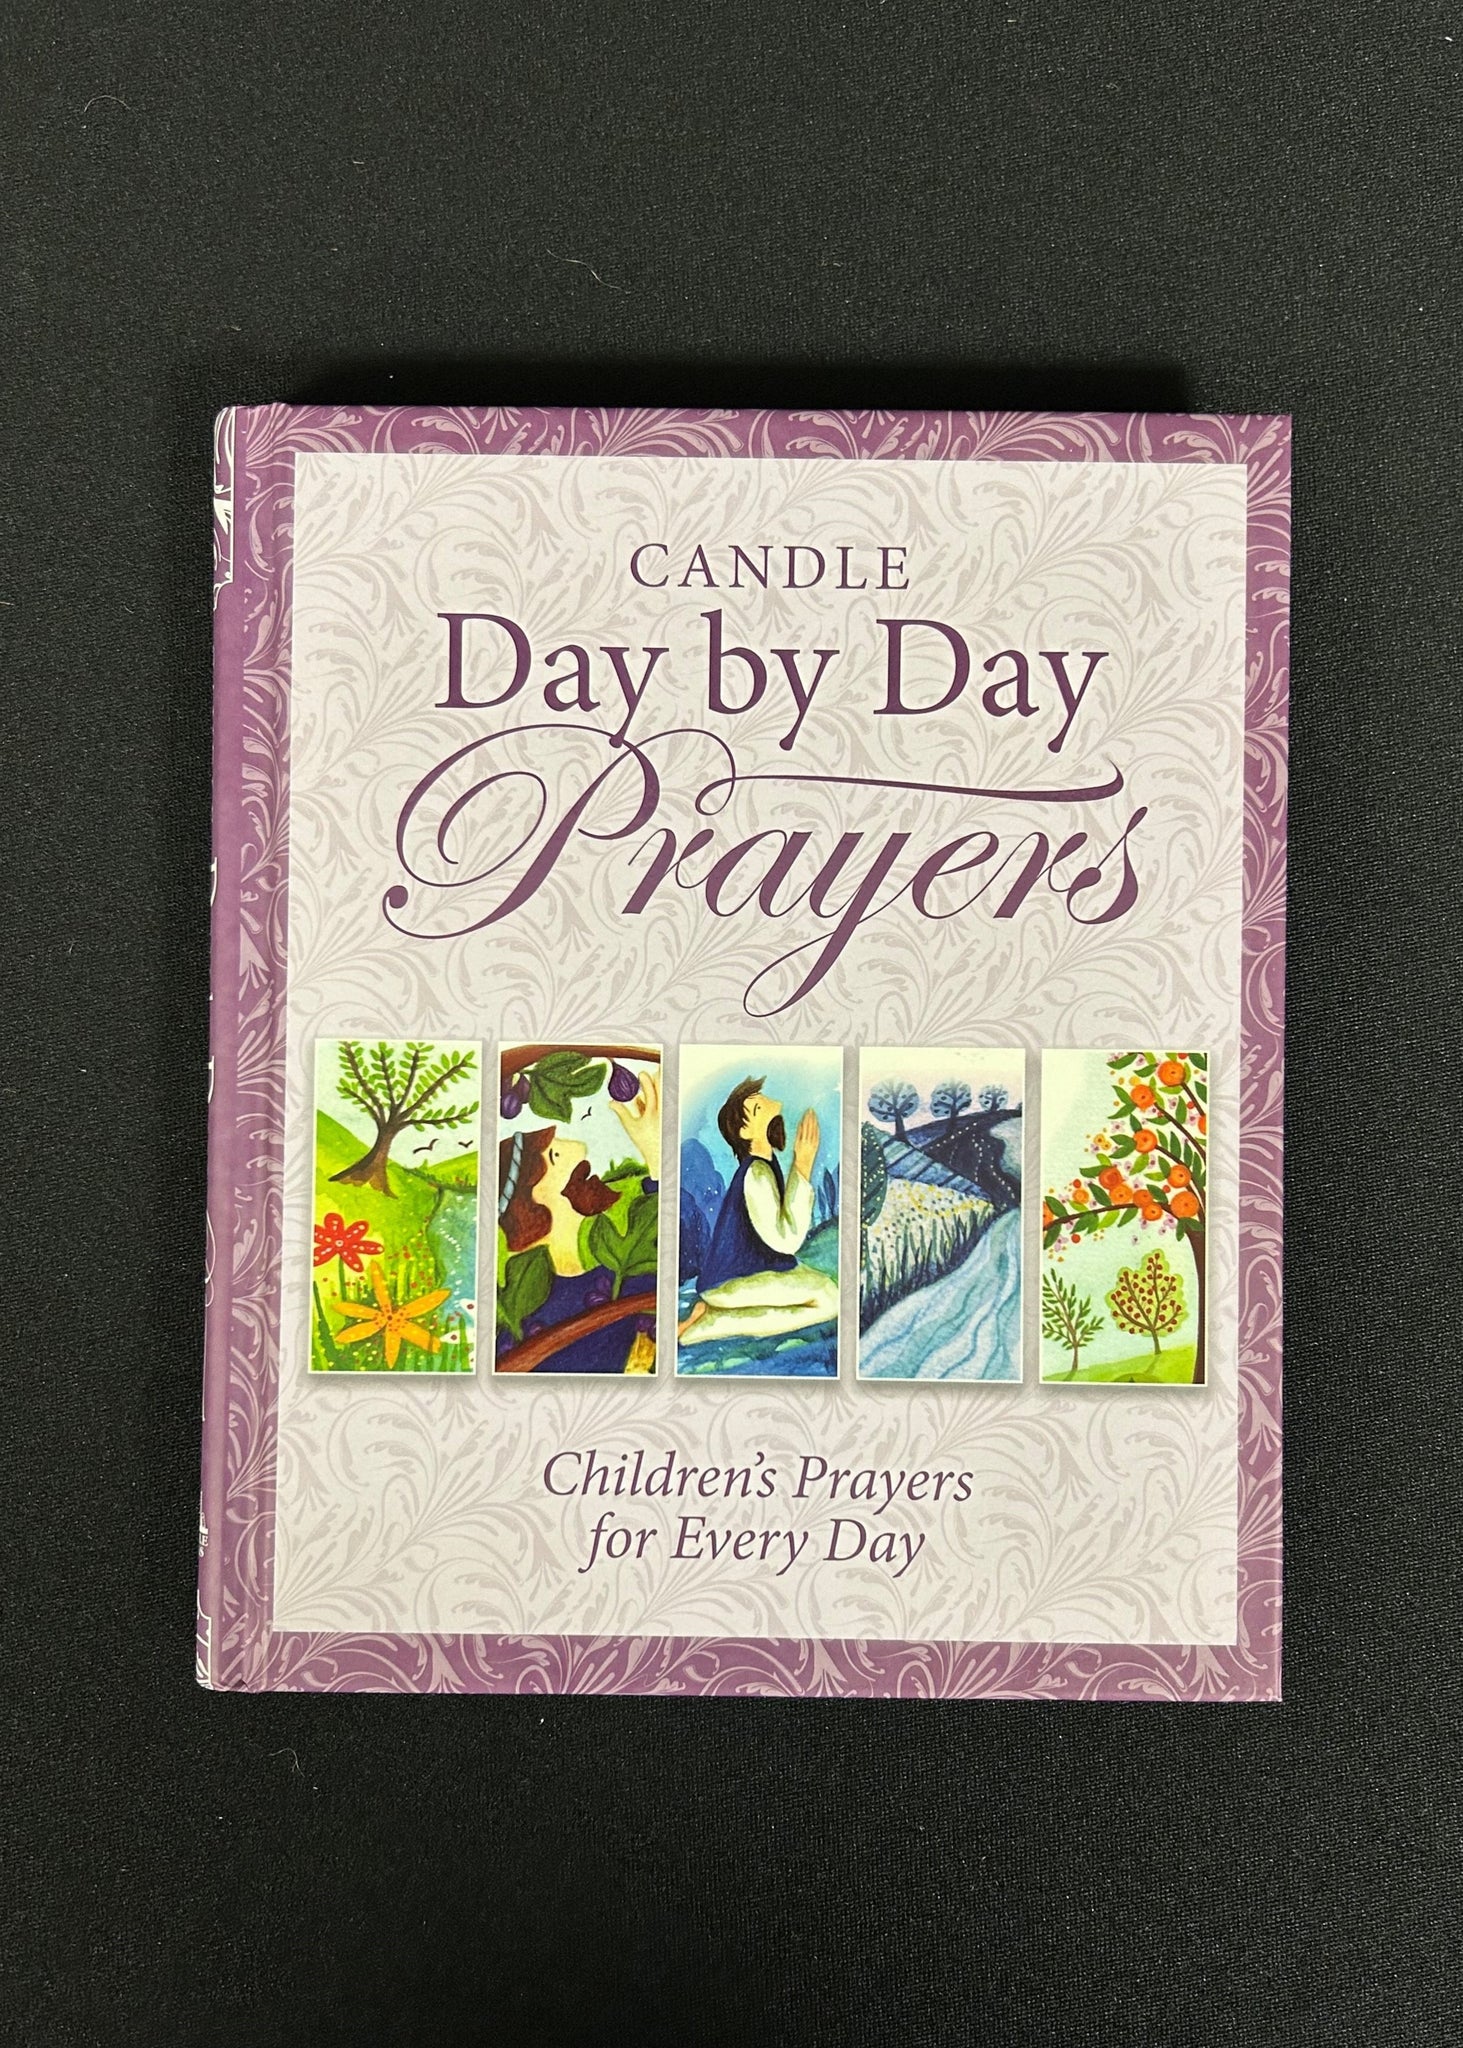 Candle Day by Day Prayers: Children's Prayers for Every Day